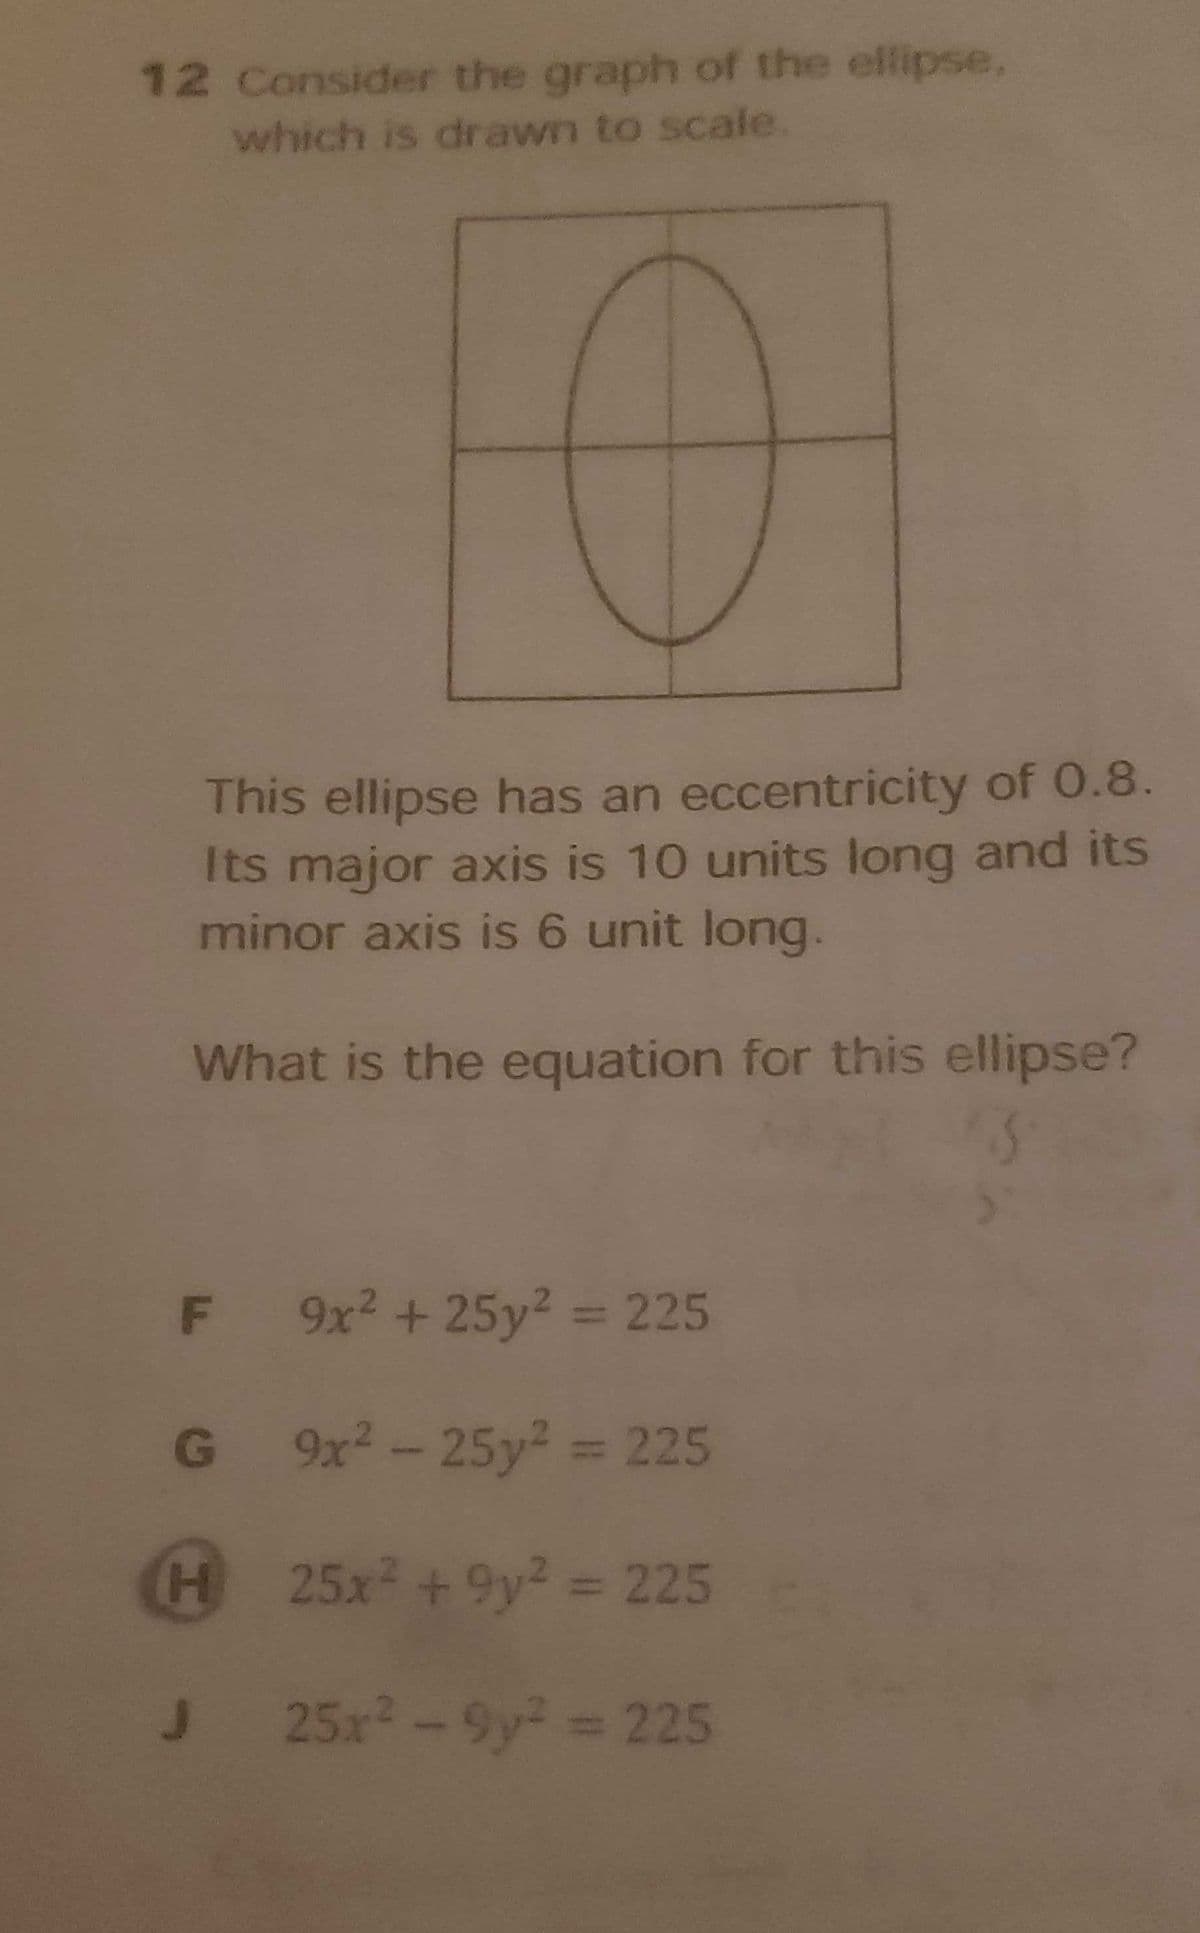 12 Consider the graph of the ellipse.
which is drawn to scale.
This ellipse has an eccentricity of 0.8.
Its major axis is 10 units long and its
minor axis is 6 unit long.
What is the equation for this ellipse?
F 9x? +25y² 225
G 9x2- 25y? = 225
H 25x +9y2 = 225
J 25x2-9y 225
